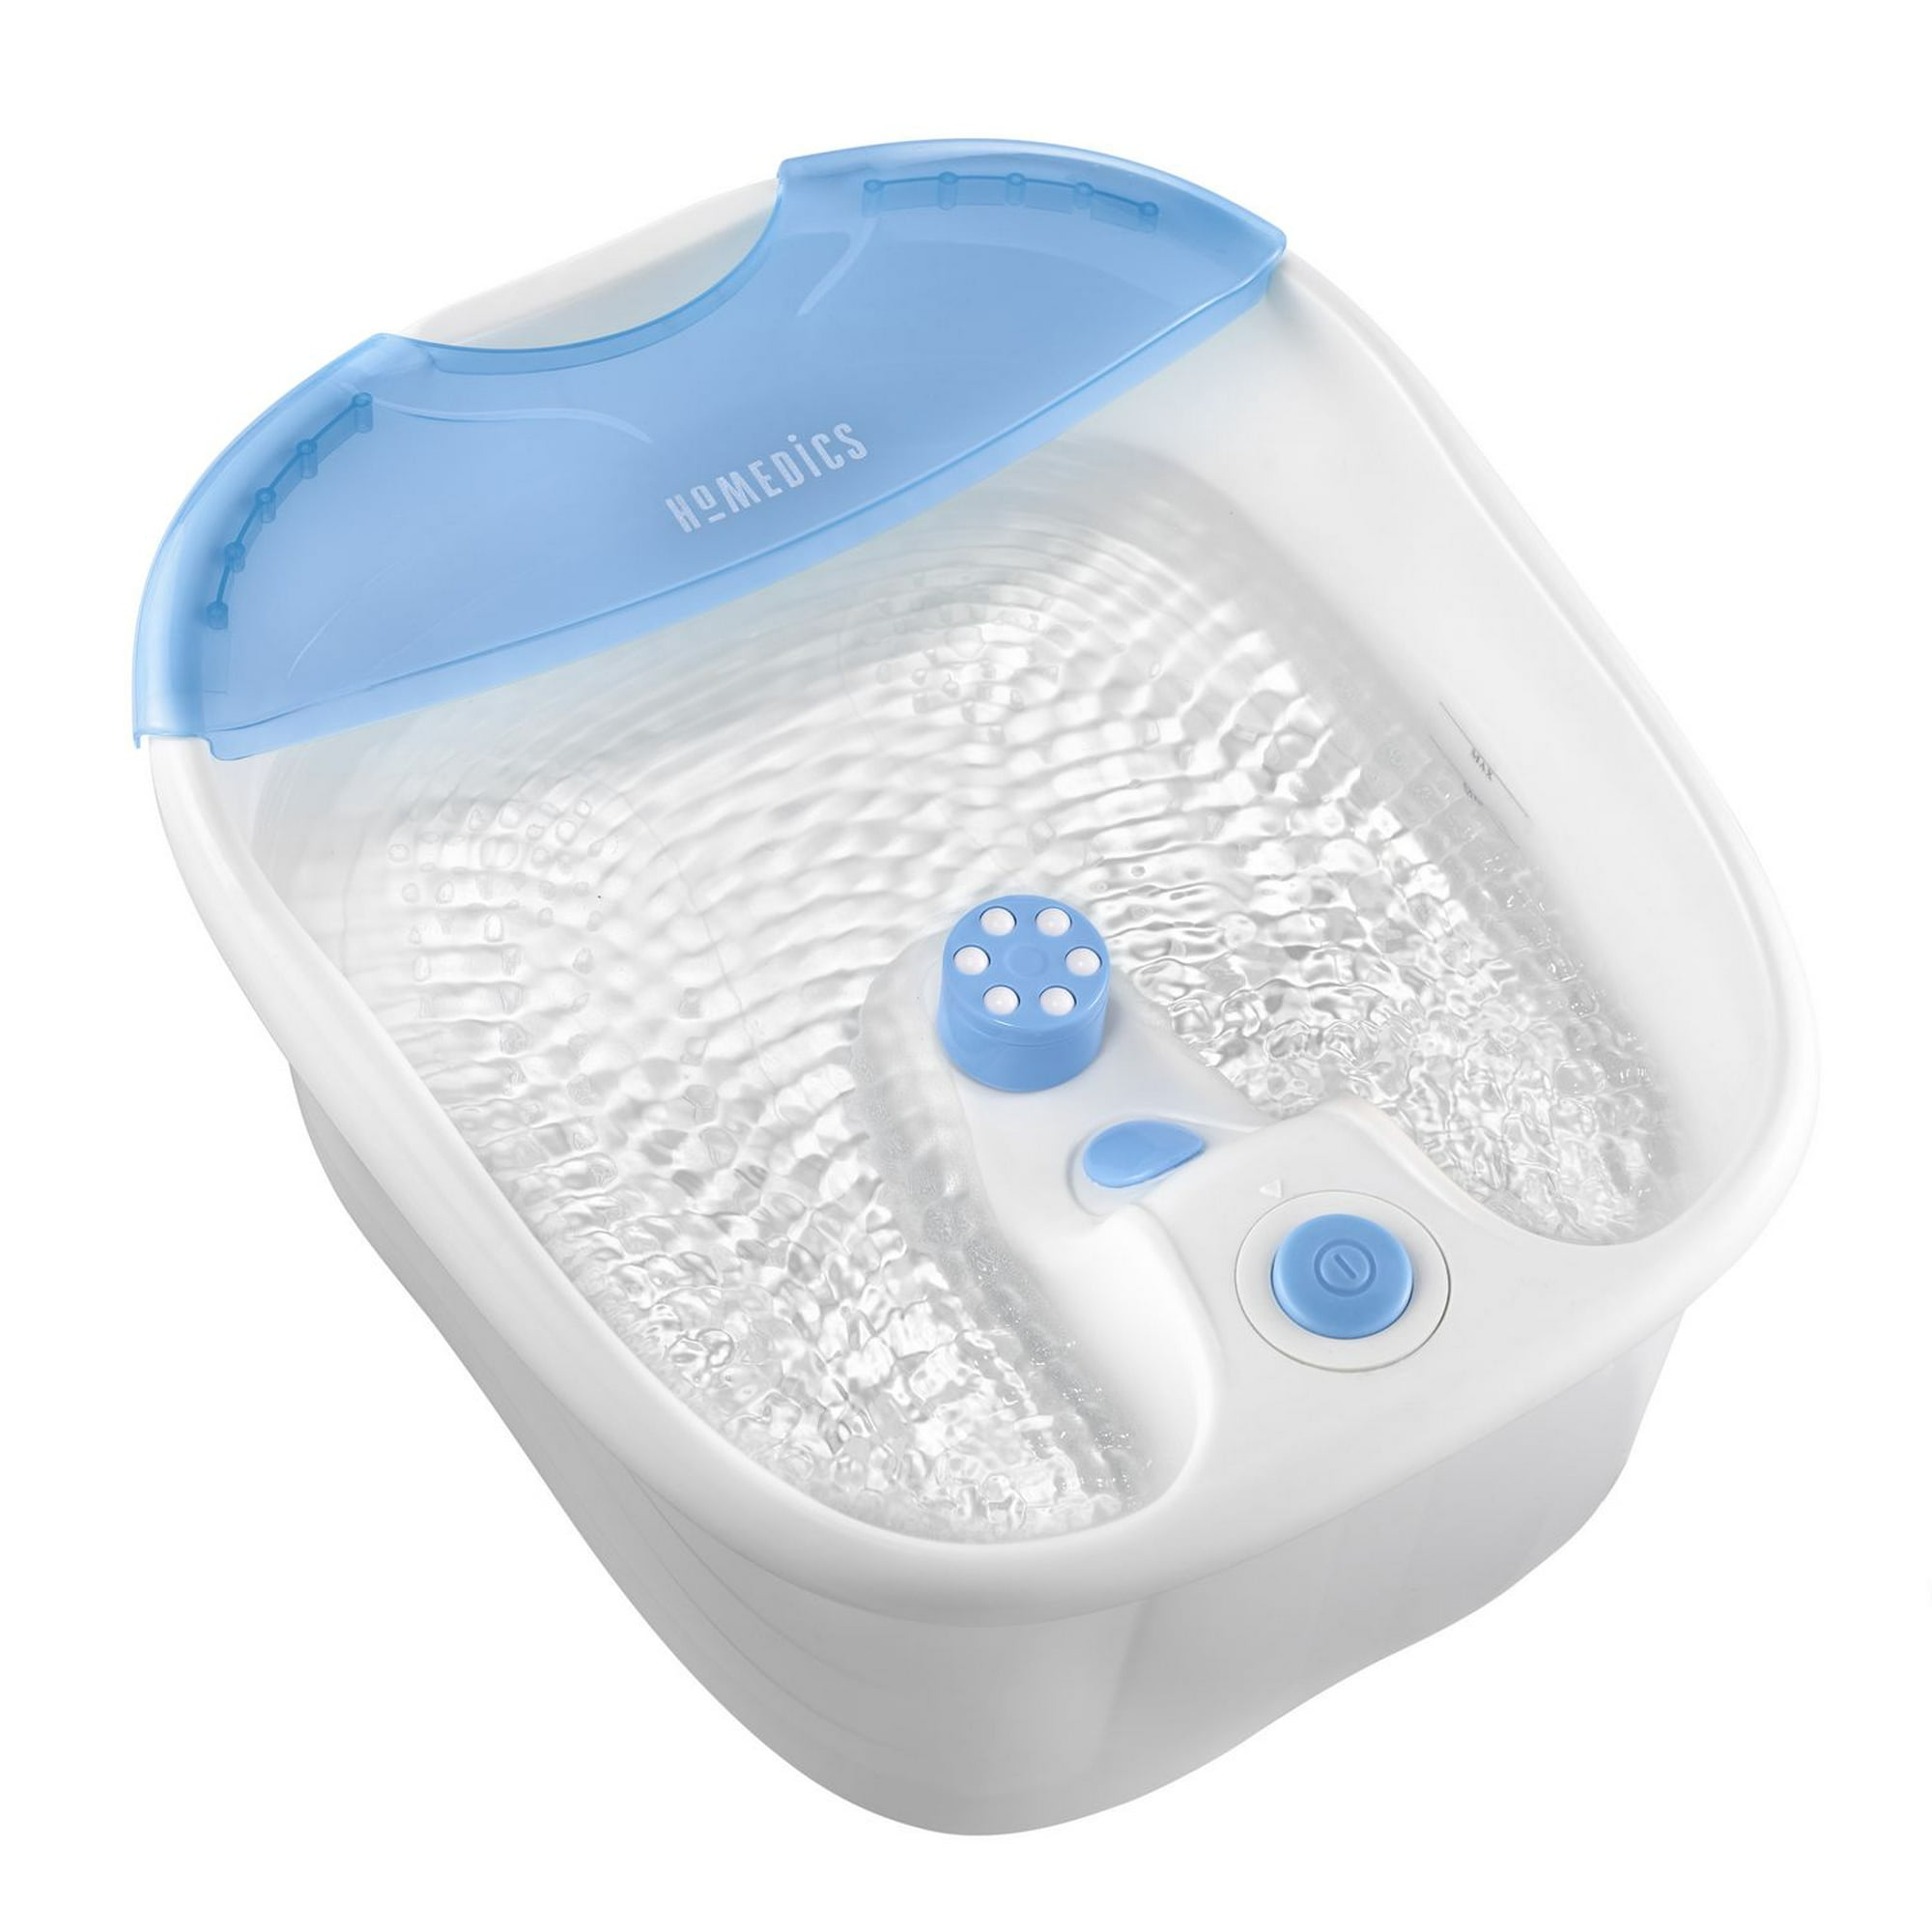 Bubble Bliss Deluxe Foot Spa, Provides the comfort and massage 